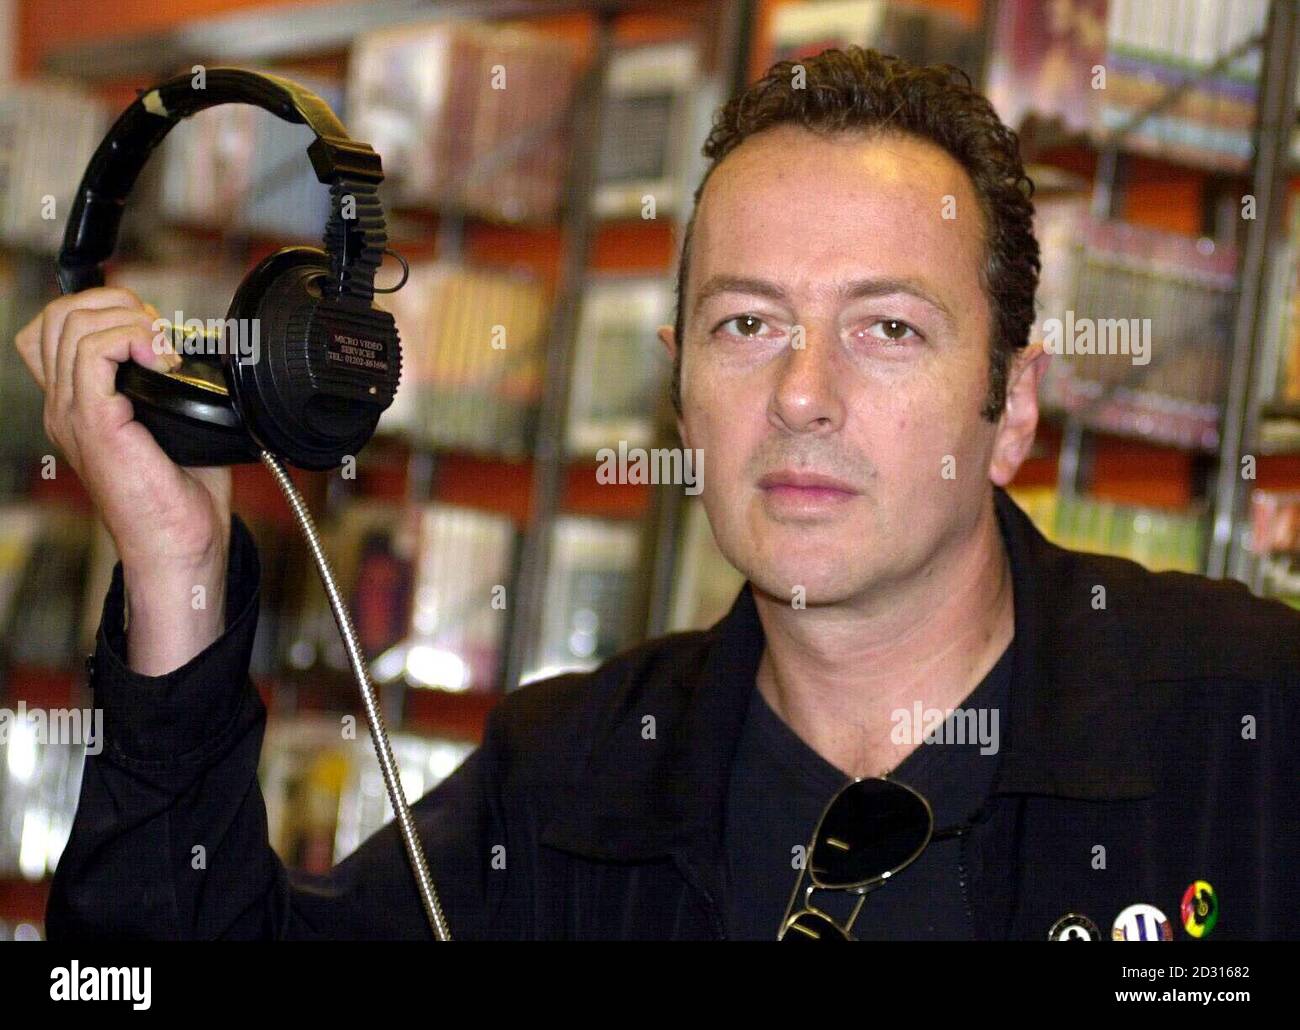 Former Clash frontman Joe Strummer, at Tower Records in Piccadilly, London, spearheading a celebrity team, to back a national organisation called Future Forests, whose aim is to plant trees to negate carbon emissions in the environment caused by cars, industry etc. Stock Photo